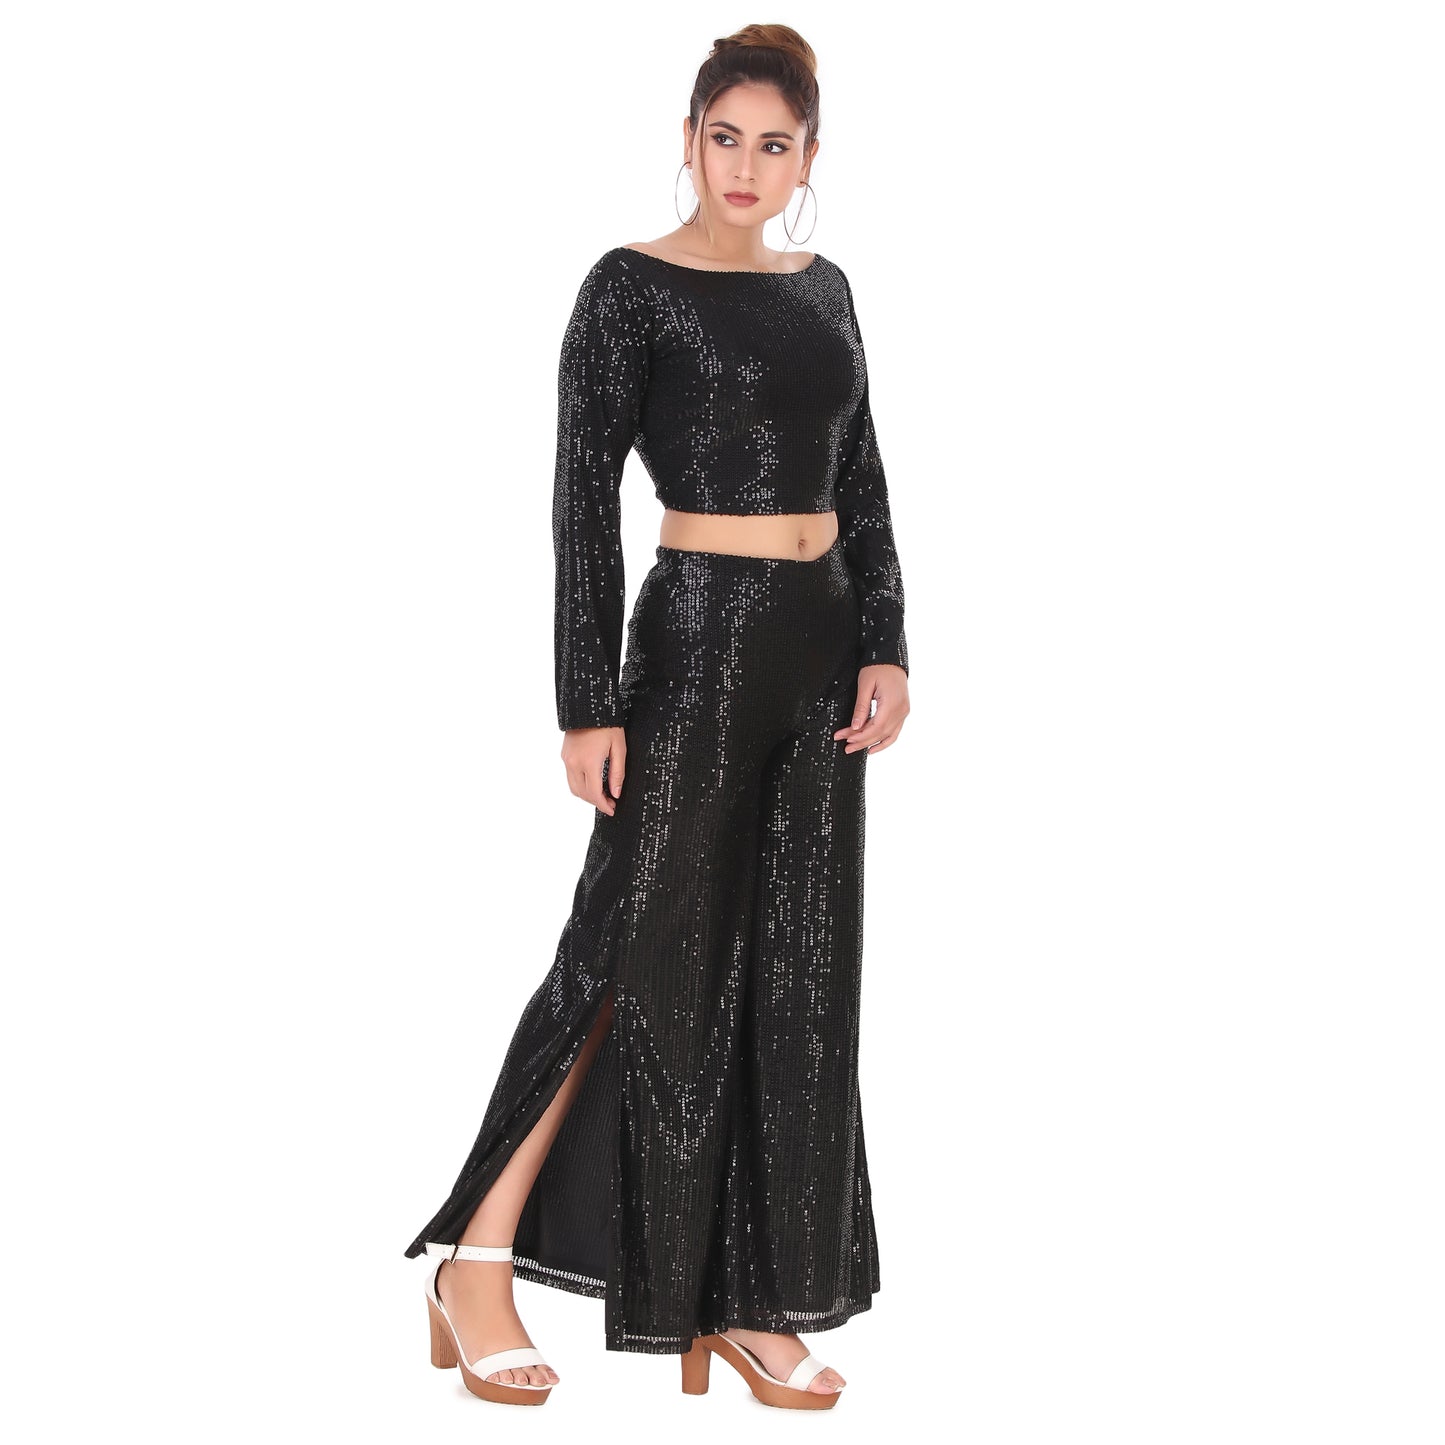 BLACK SEQUENCE TOP AND FLARED PANT WITH SLIT